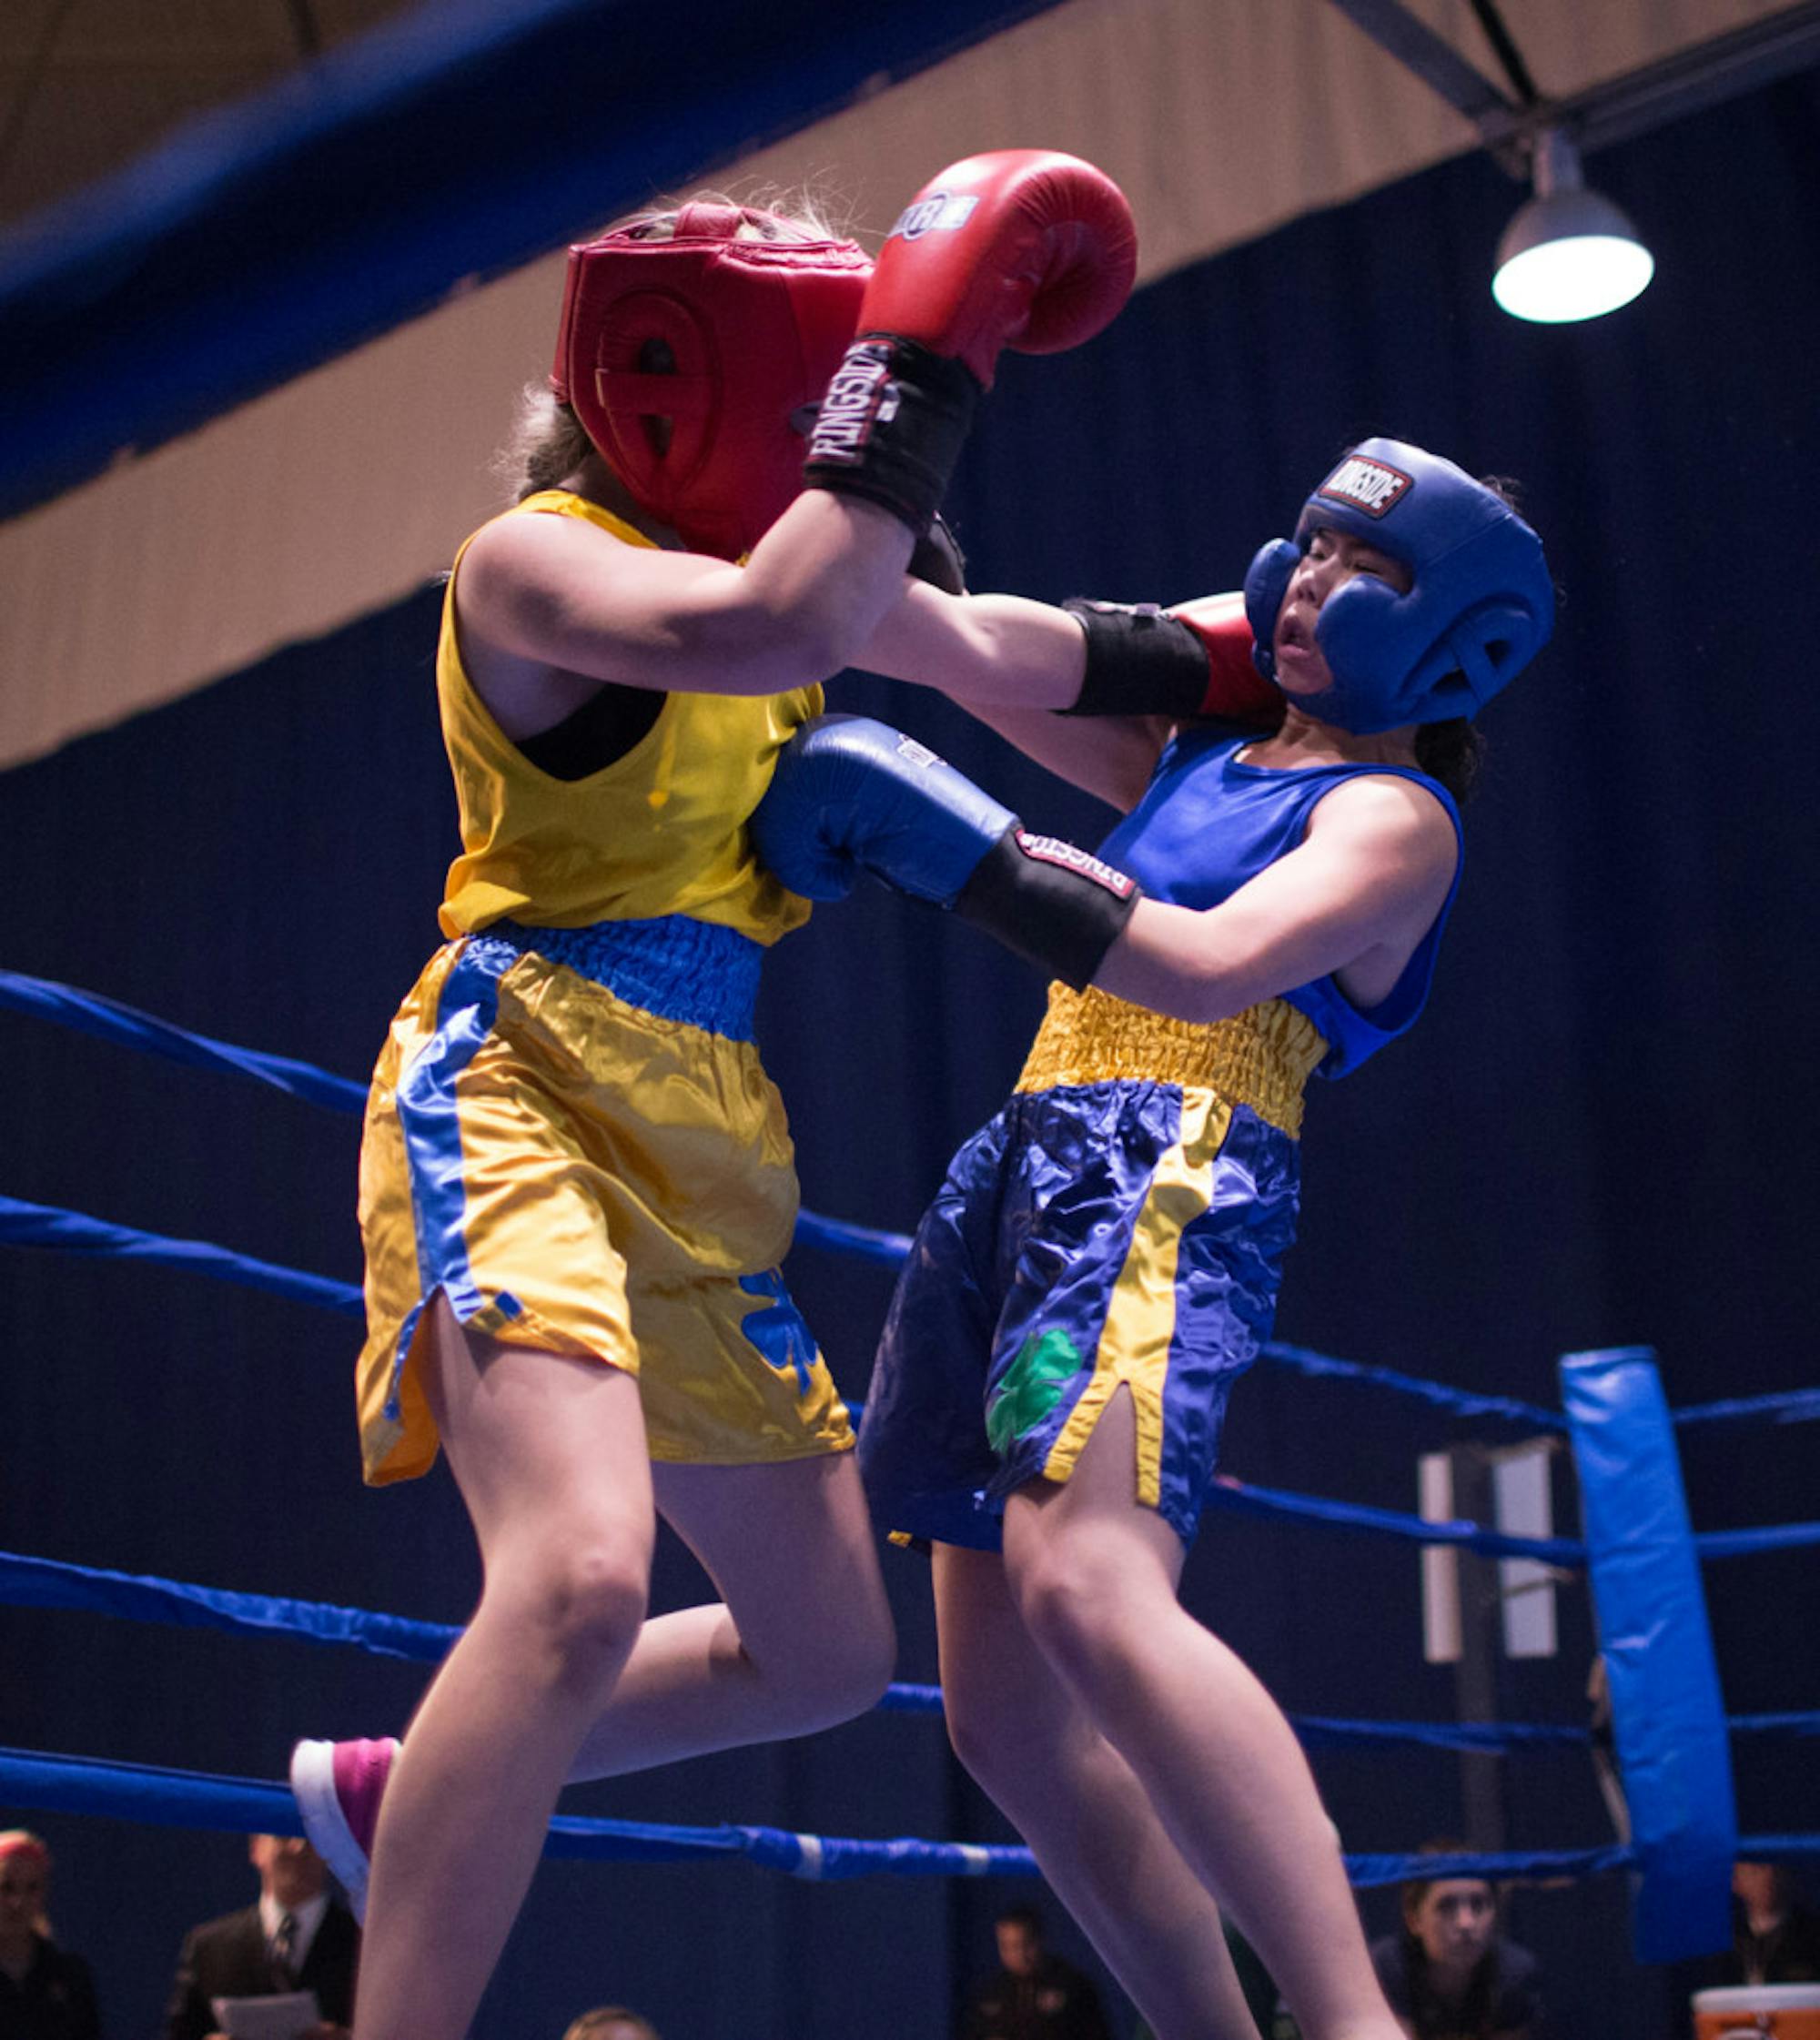 Senior Amanda “Boxing Panda” Leung connects on a jab to the body while absorbing a shot to the side of the head during her semifinal victory over sophomore Mia “The Hulk” Hogan-Davis on Tuesday night. Leung won her final against Casey “C My Fists” Gelchoin in a split decision Friday night at the Joyce Center Fieldhouse.